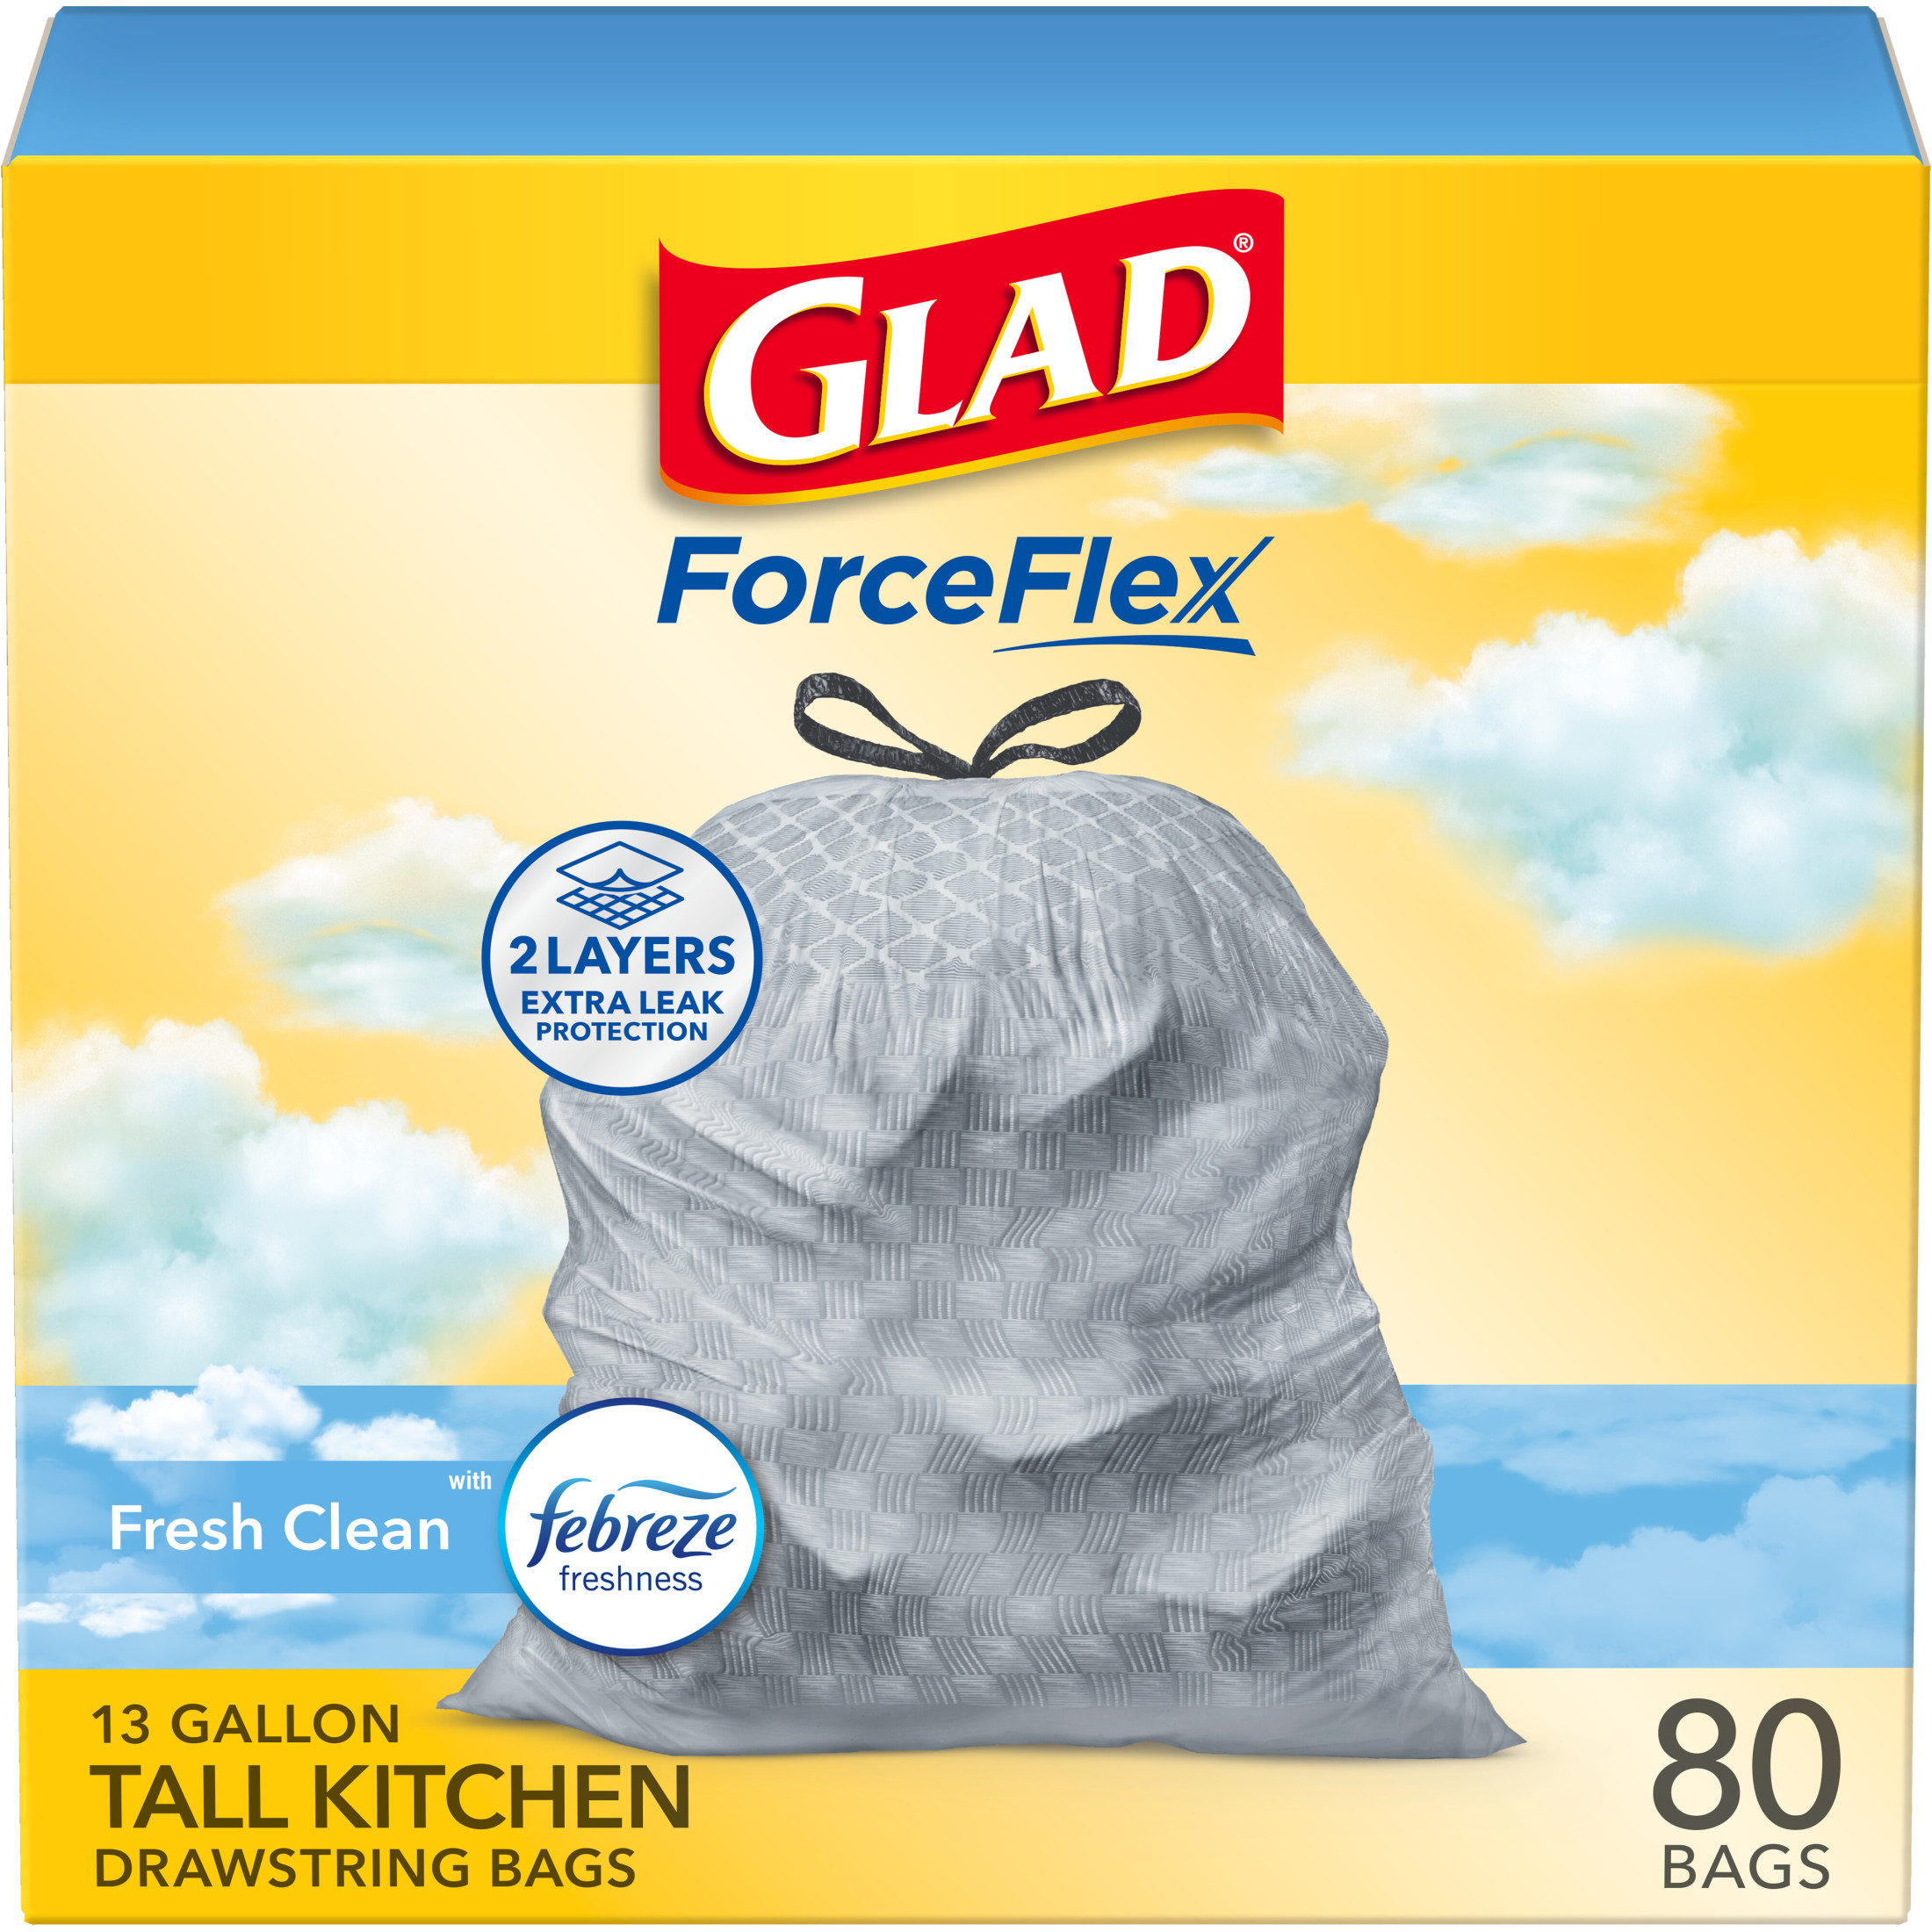 Glad ForceFlex 13-Gallon Tall Kitchen Trash Bags, Fresh Clean Scent with Febreze, 80 Bags - image 1 of 13